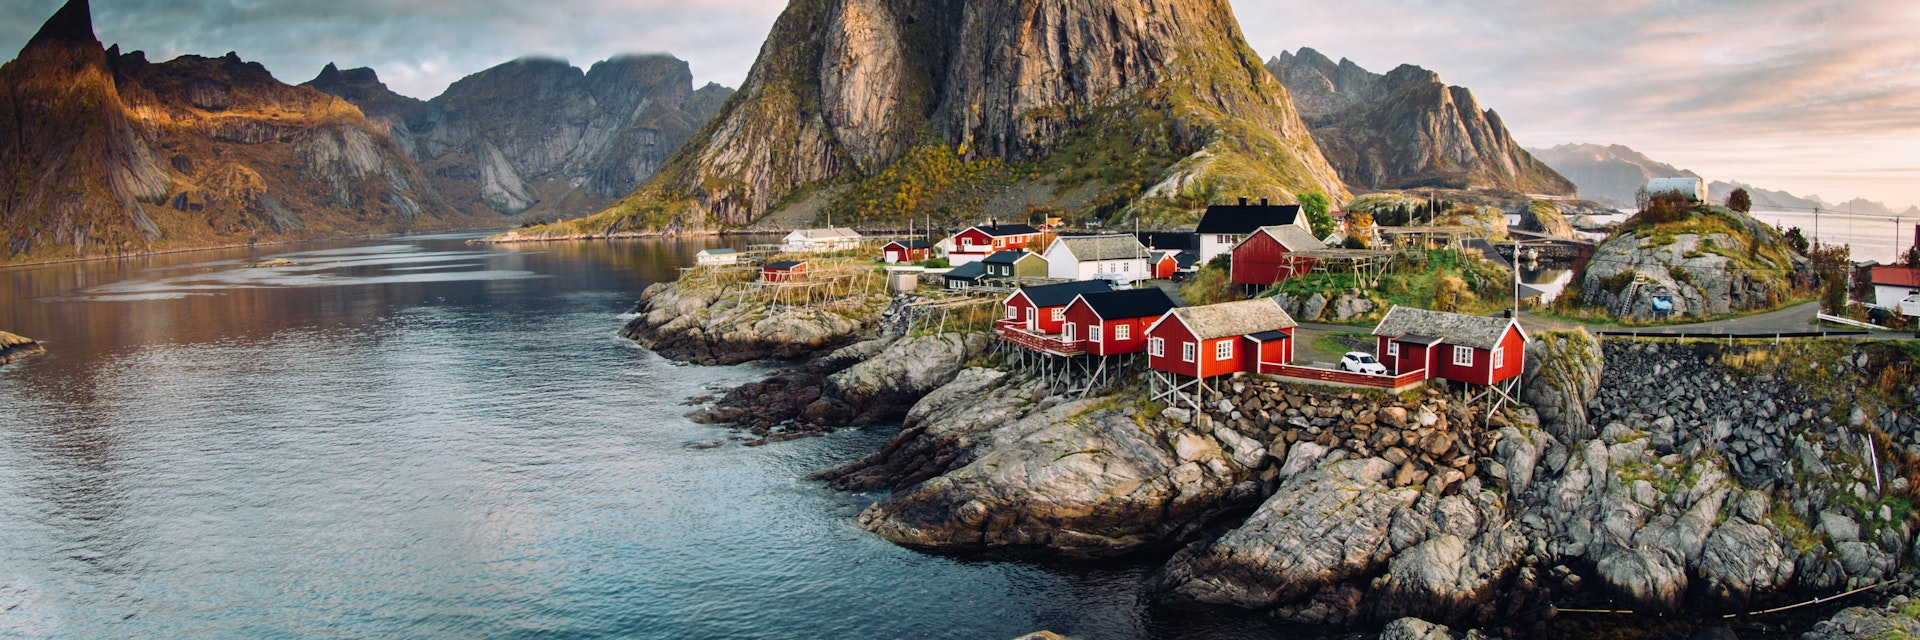 Norwegian fishing village of Hamnoy in the Lofoten Islands. Dramatic sunset clouds above steep mountain peaks.